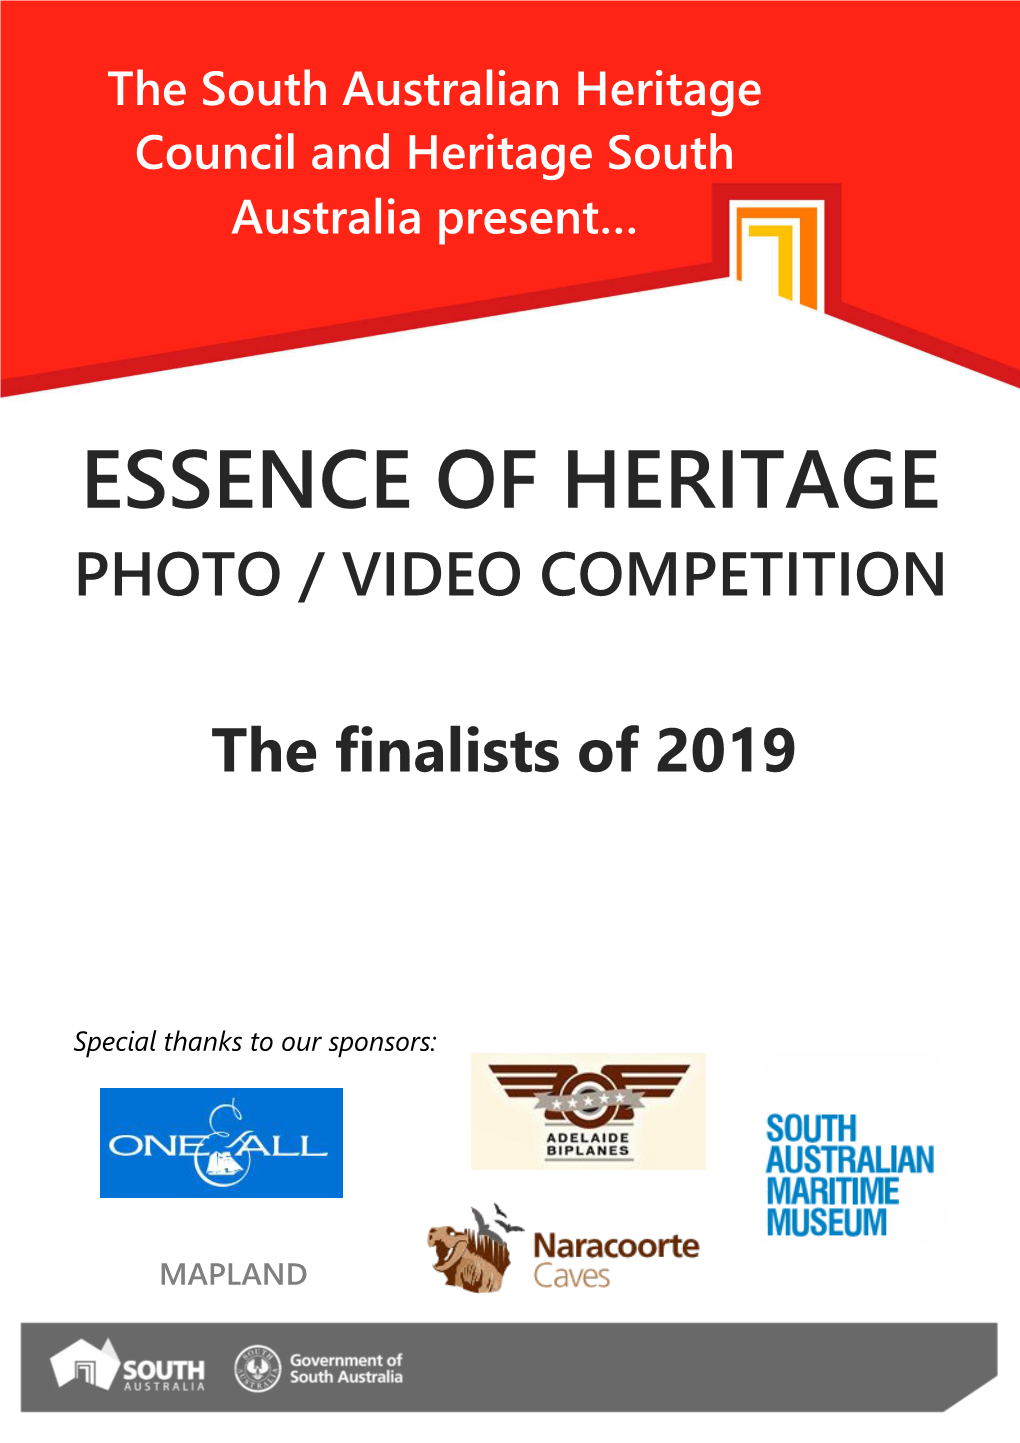 Essence of Heritage Photo / Video Competition